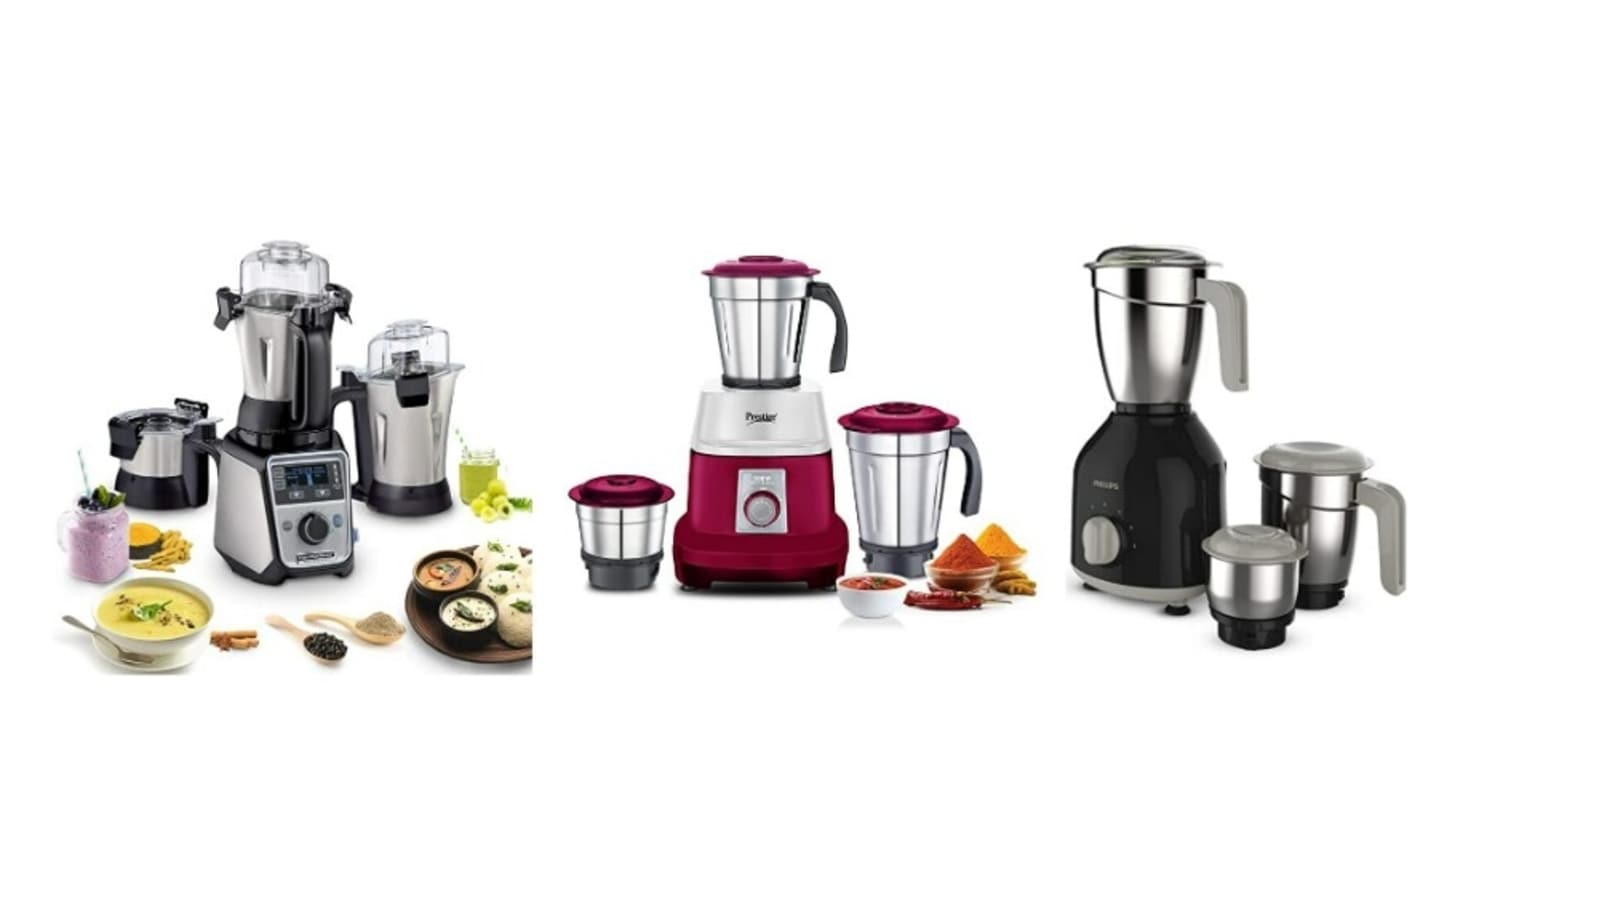 What are the Vital Features of a Multipurpose Mixer Grinder?